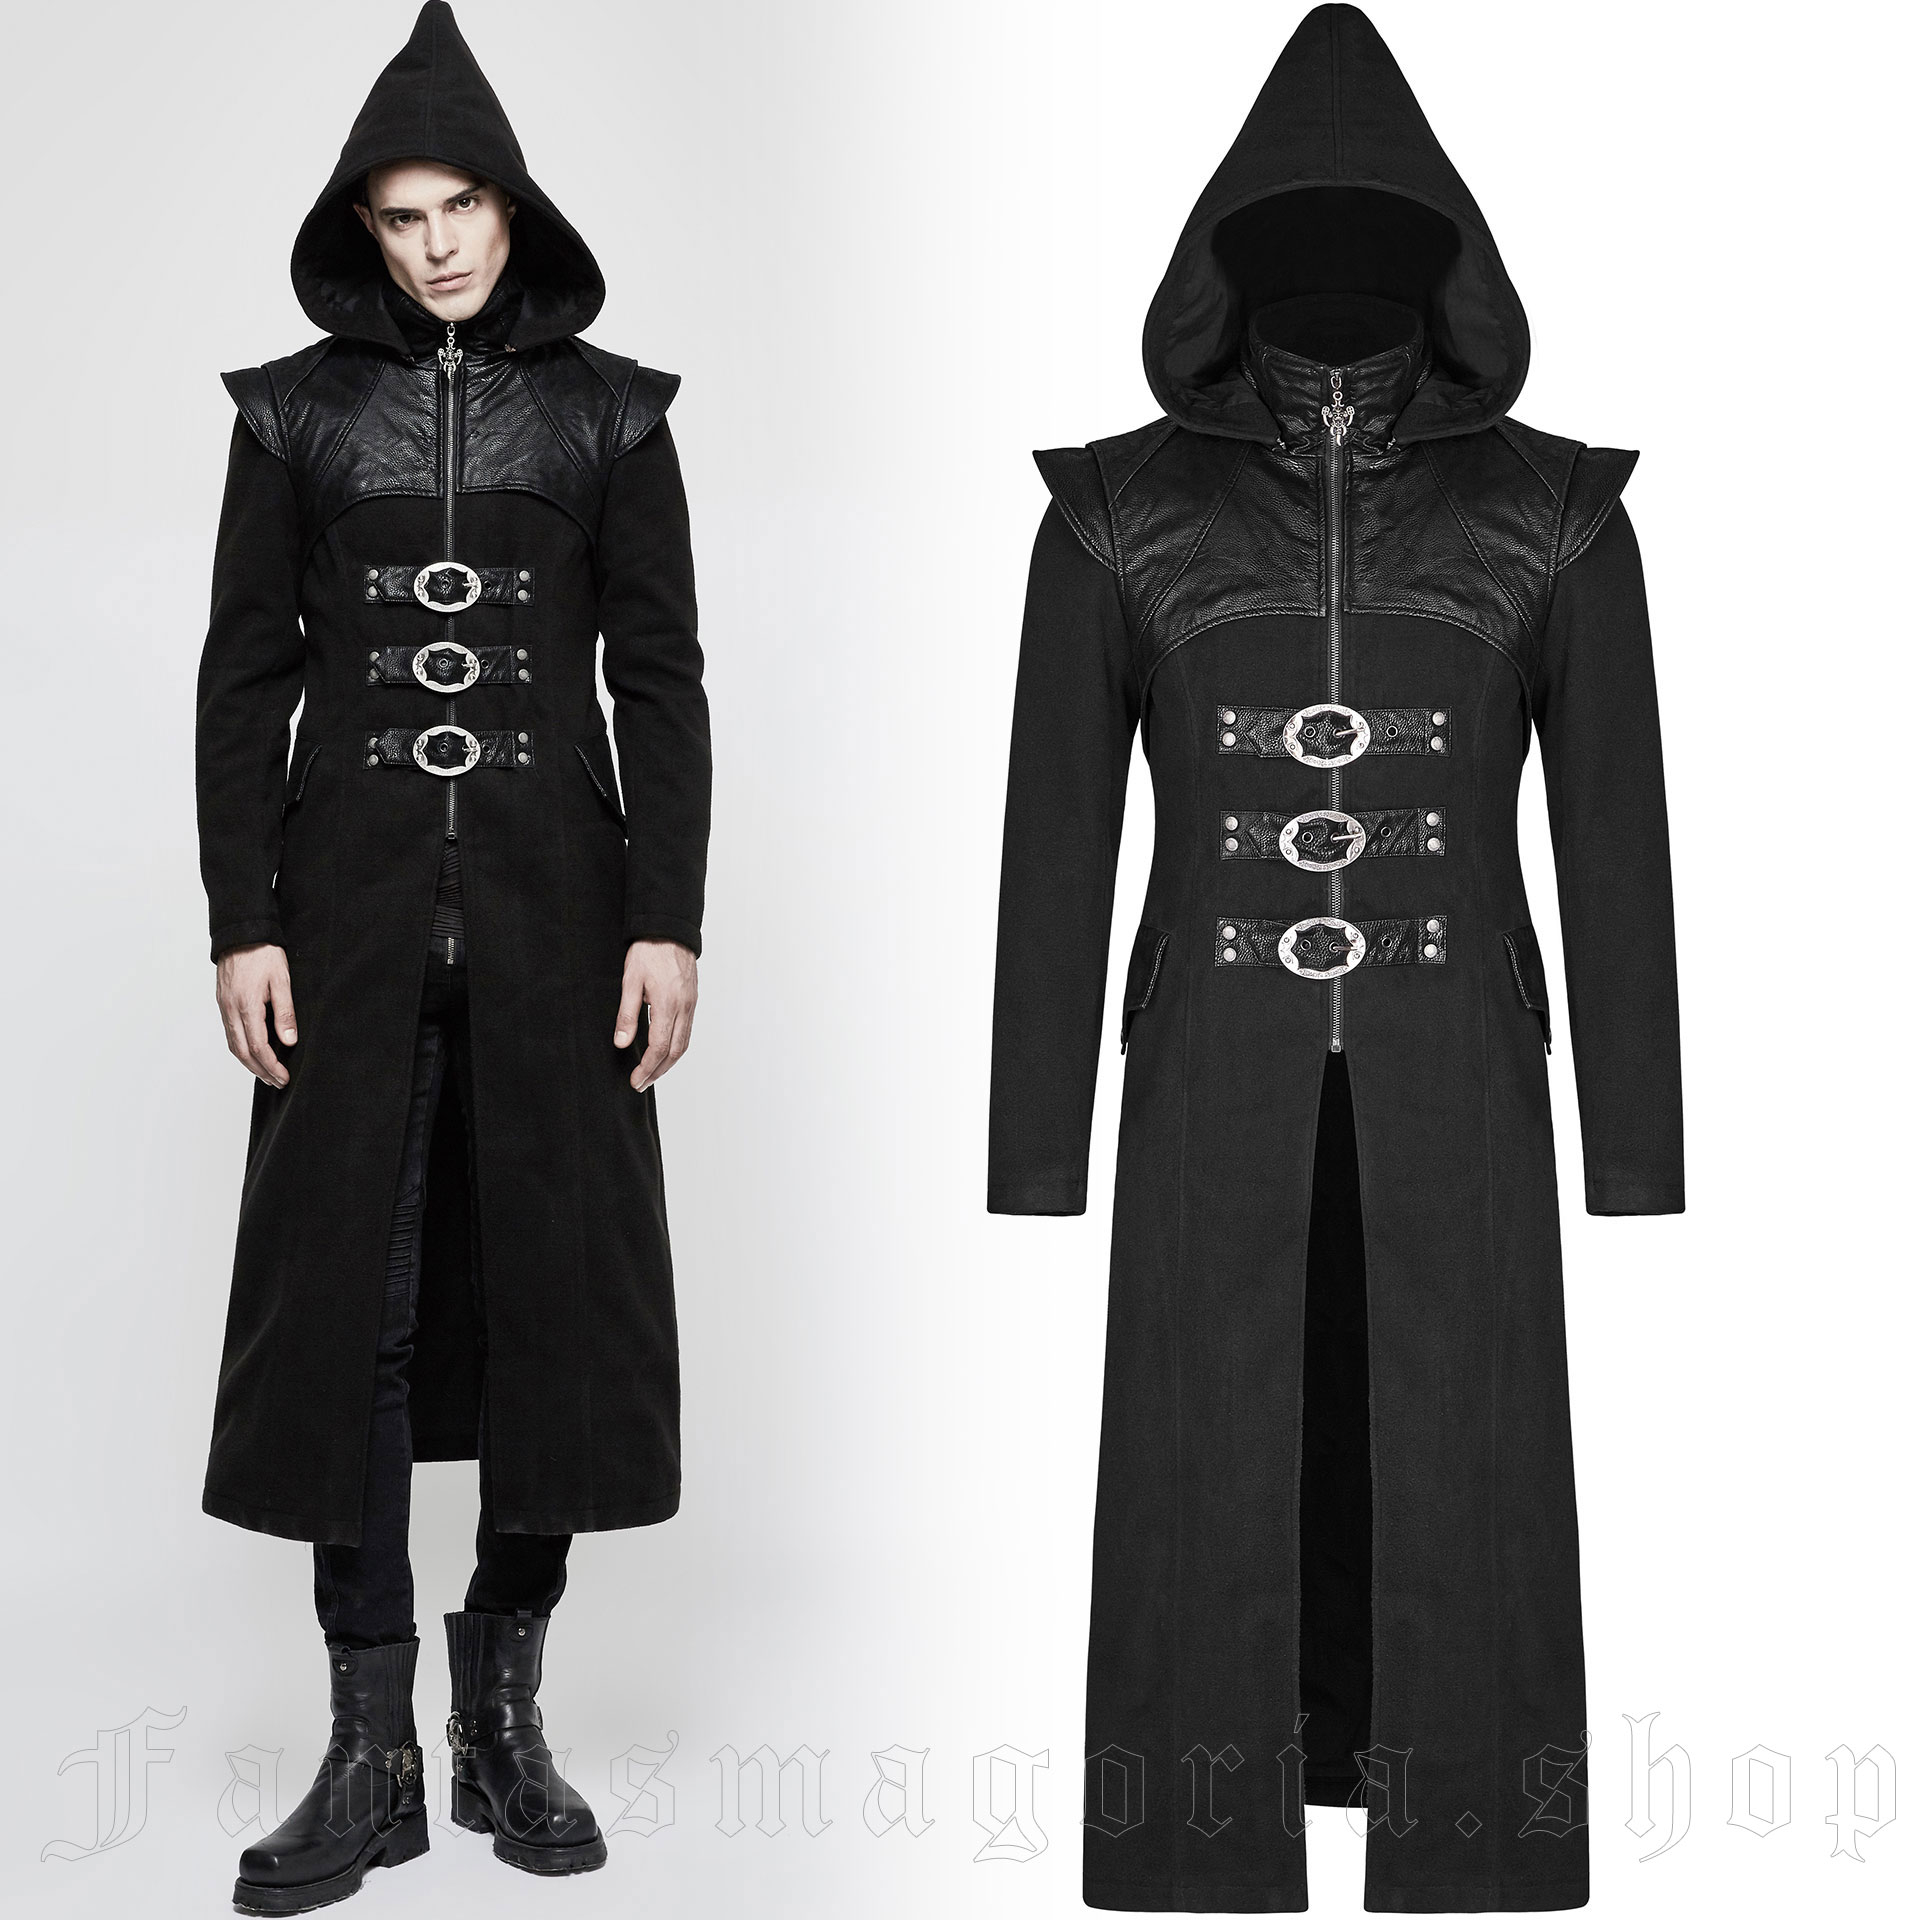 Assassin'S Creed Coat Punk Rave Y-816 1